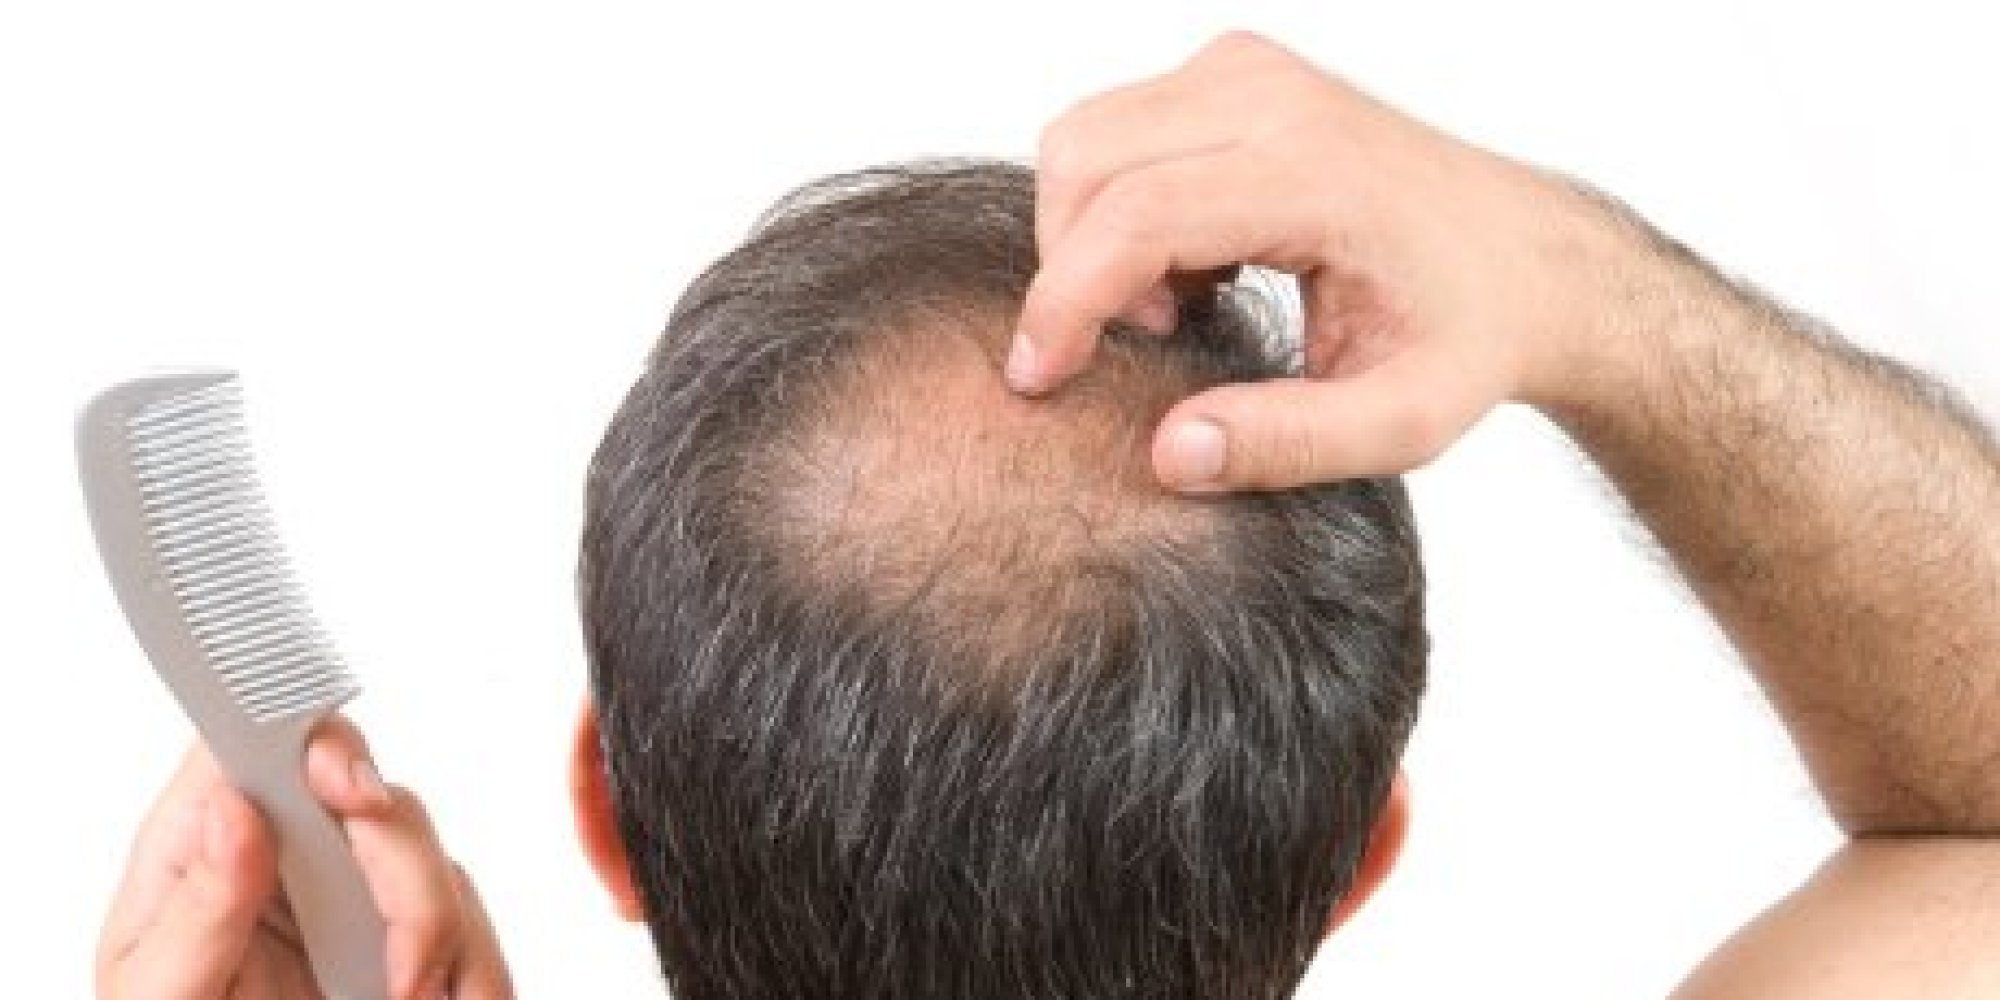 3 Easy Ways To Avoid Hair Loss And Promote Hair Regrowth Quickly!